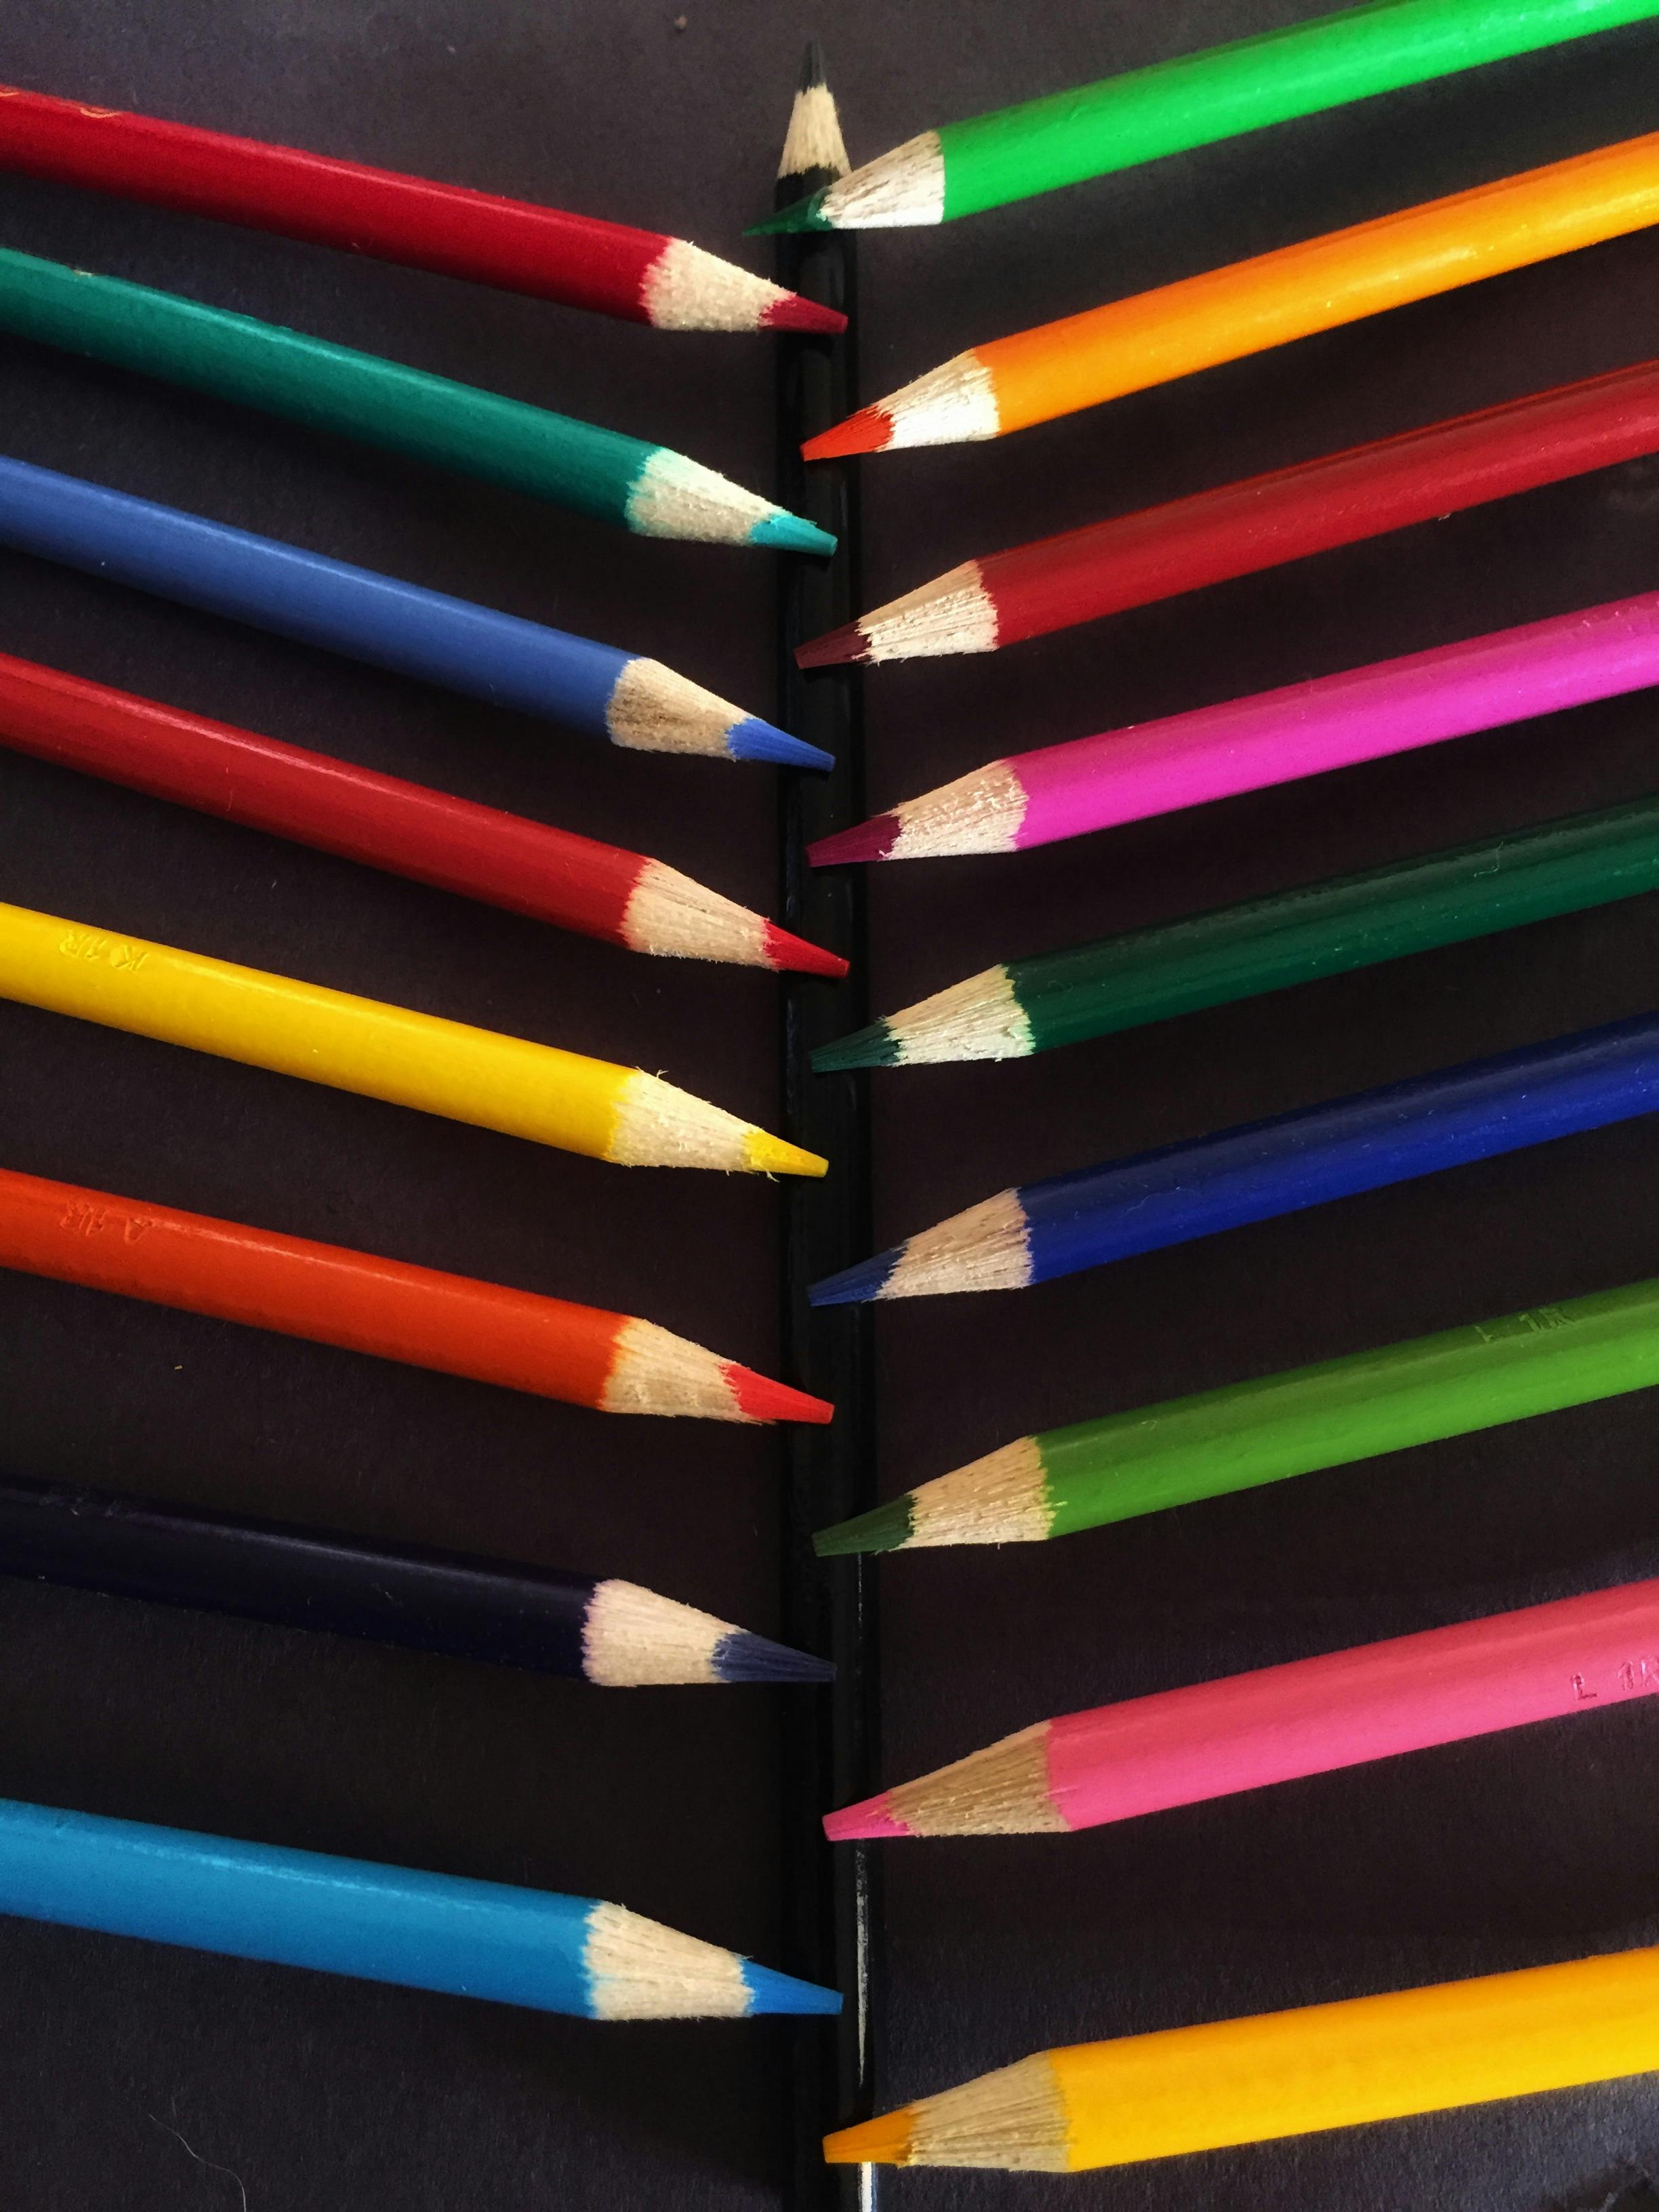 Free stock photo of abstract photo, colour pencils, colourful